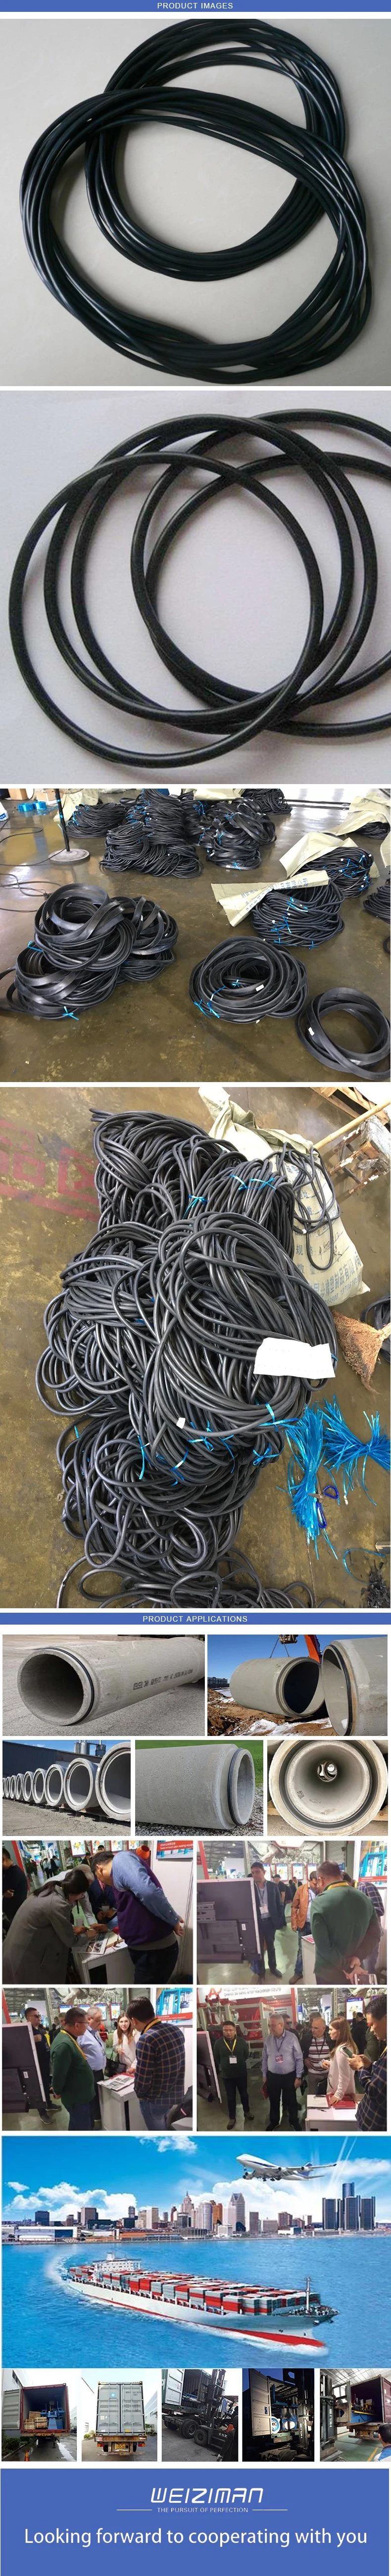 Integrated Concrete Pipe Seal Sealing Gaskets for Water Drainage Pipes